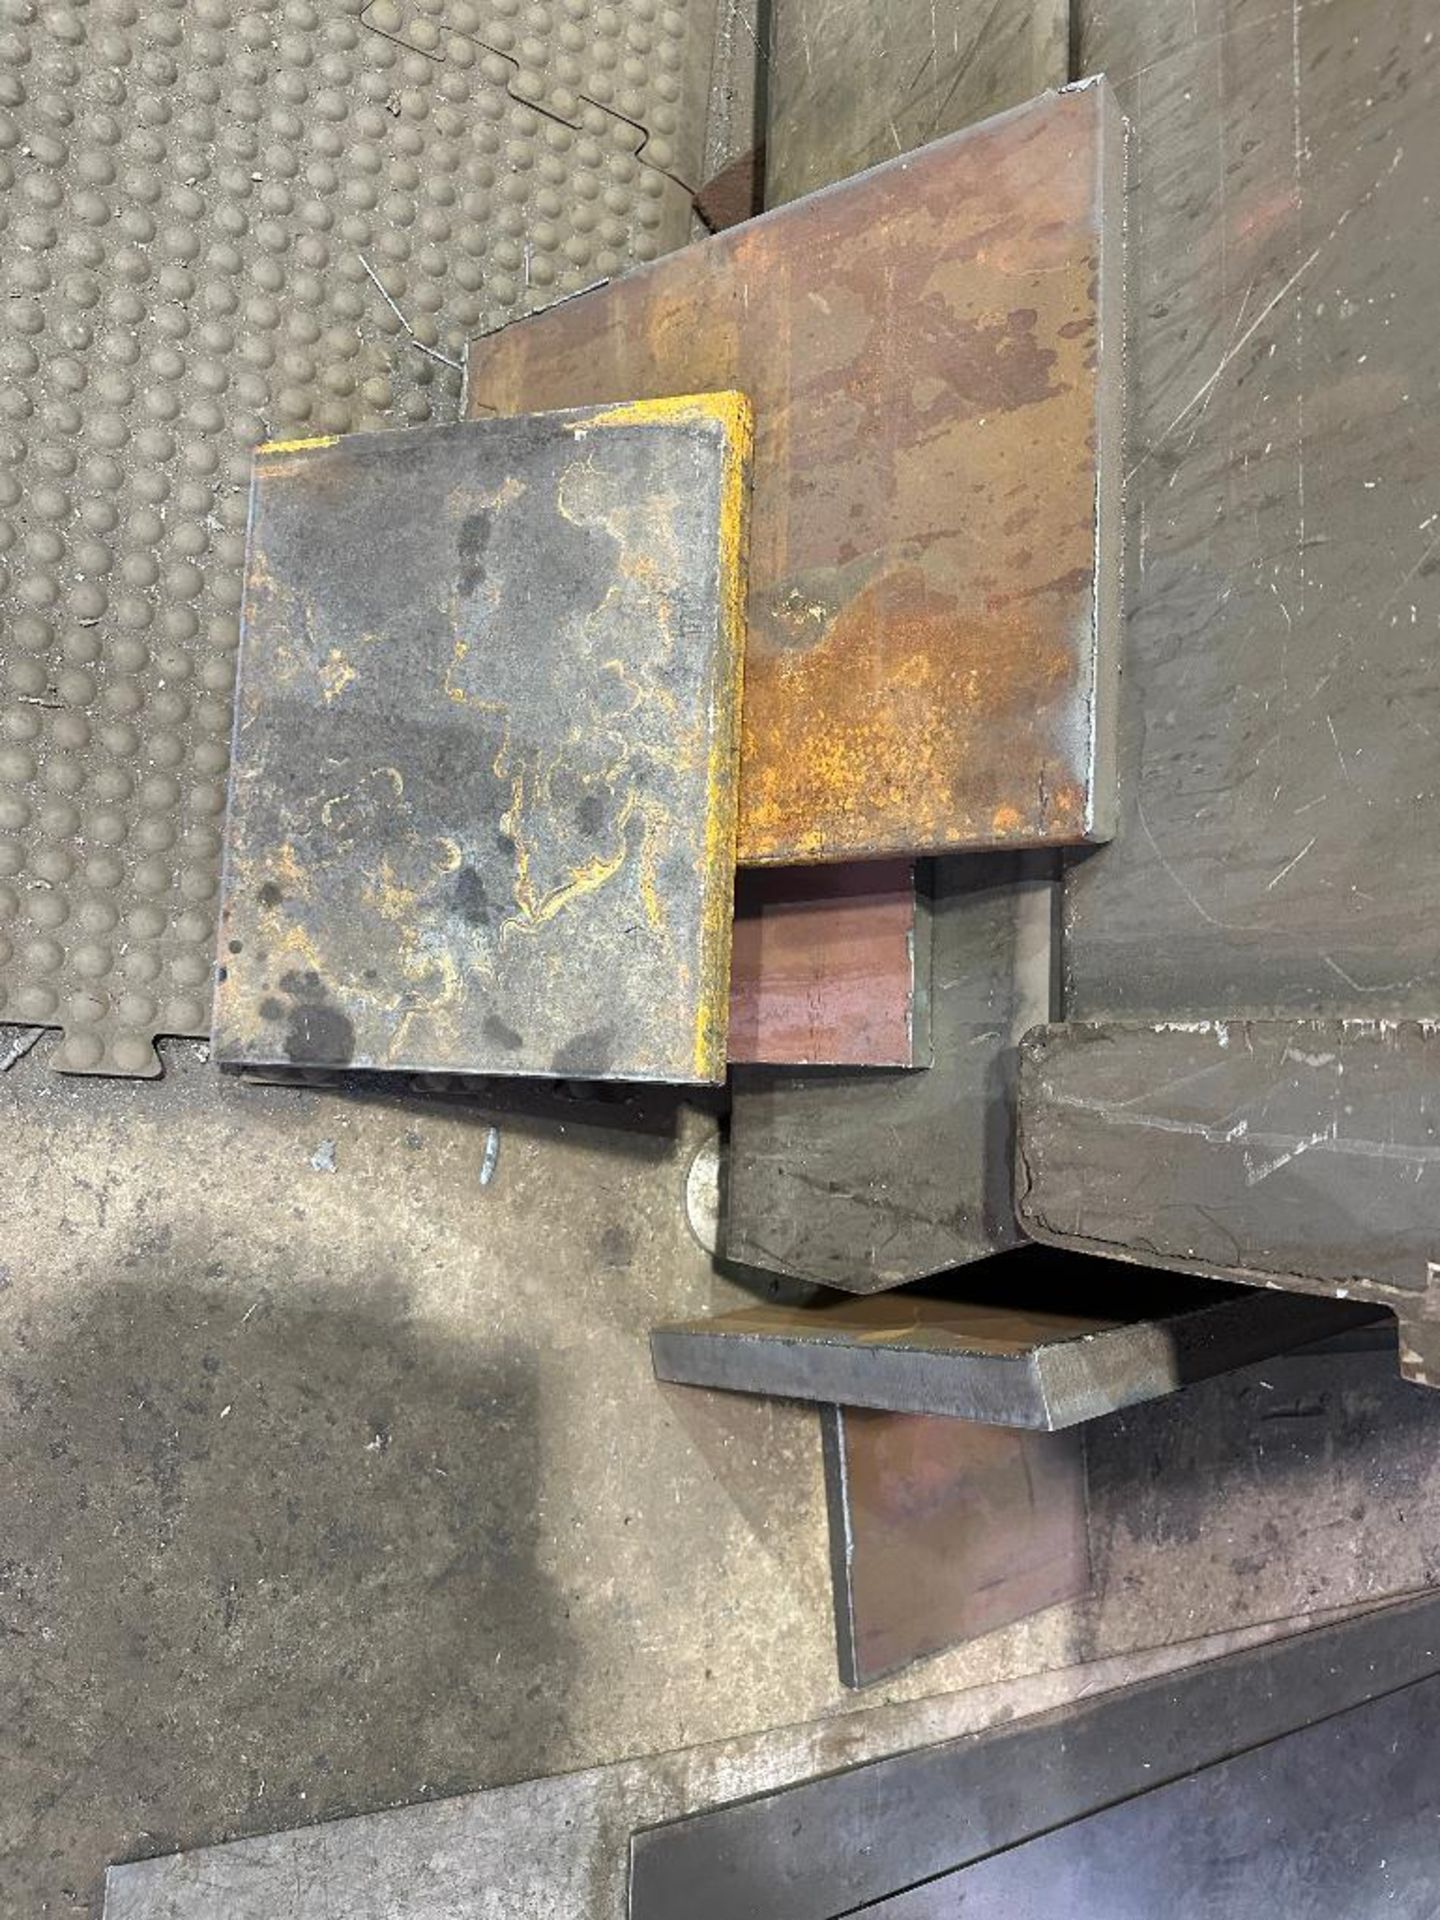 Lot of Asst. Steel Including Plates, Cut-Offs, etc. - Image 10 of 10